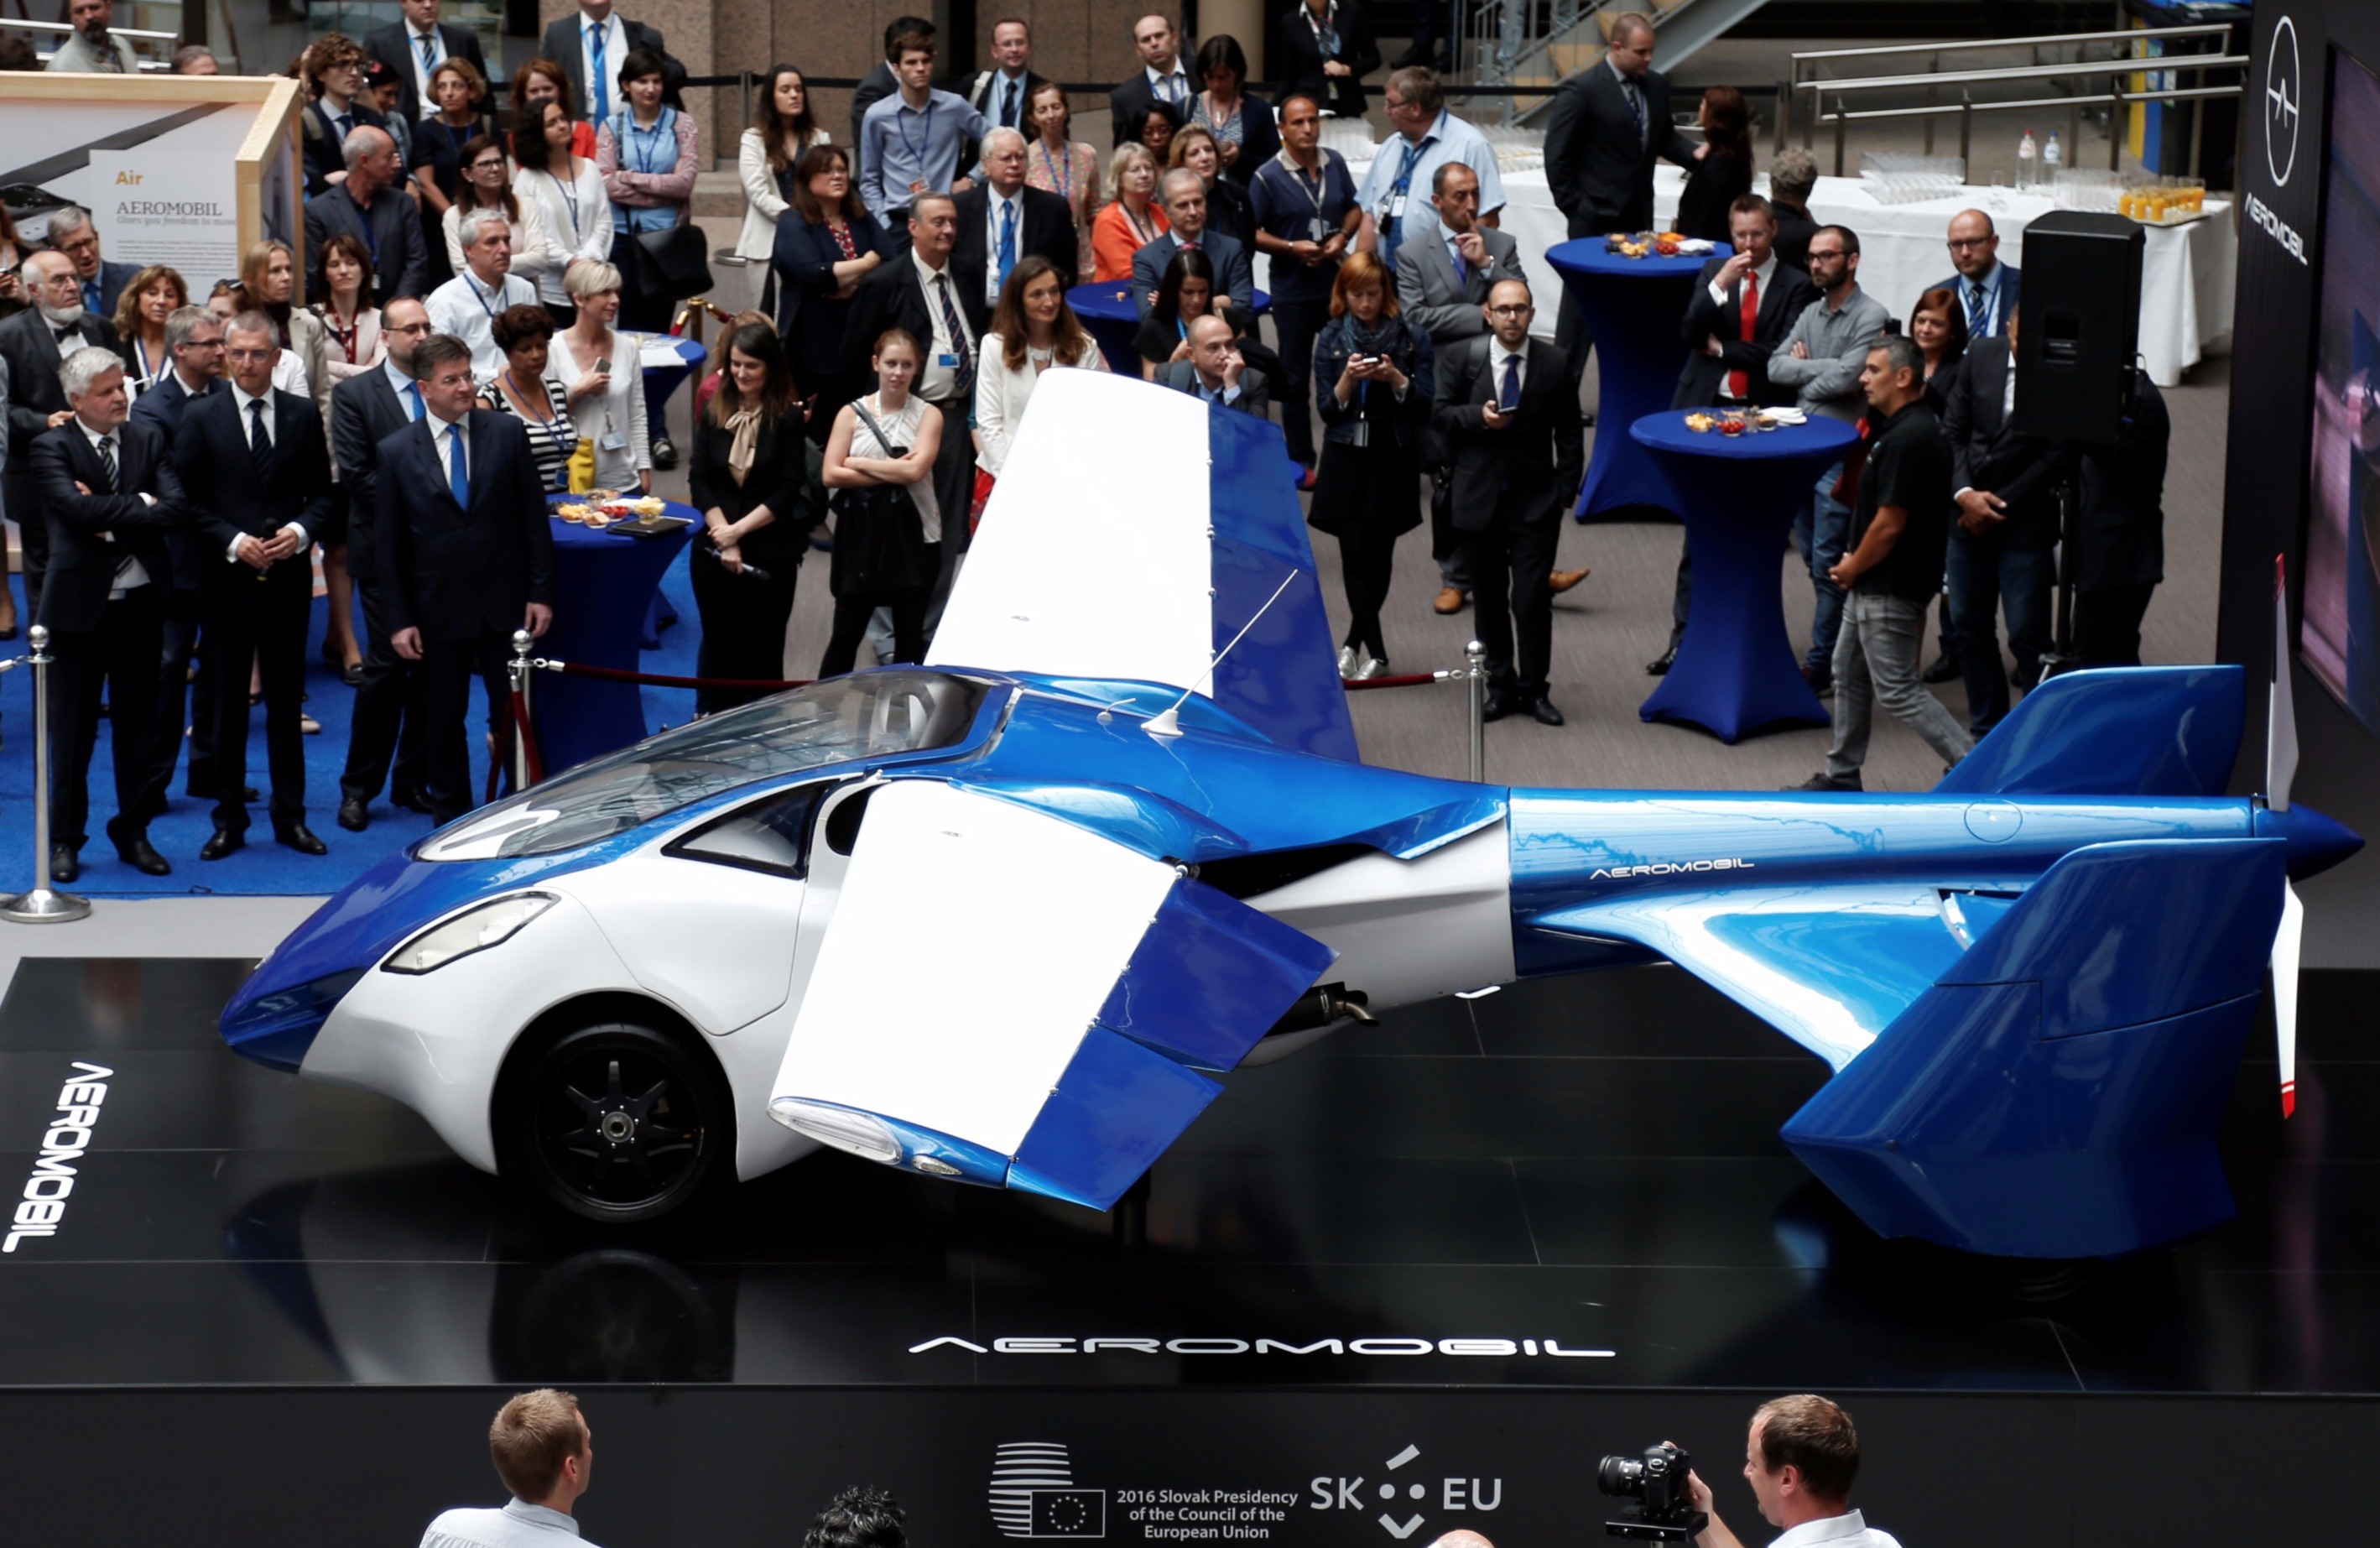 AeroMobil, a flying car prototype, is pictured during a ceremony marking the taking over of the rotating presidency of the European Council by Slovakia, in Brussels, Belgium, July 7, 2016. [REUTERS/Francois Lenoir]